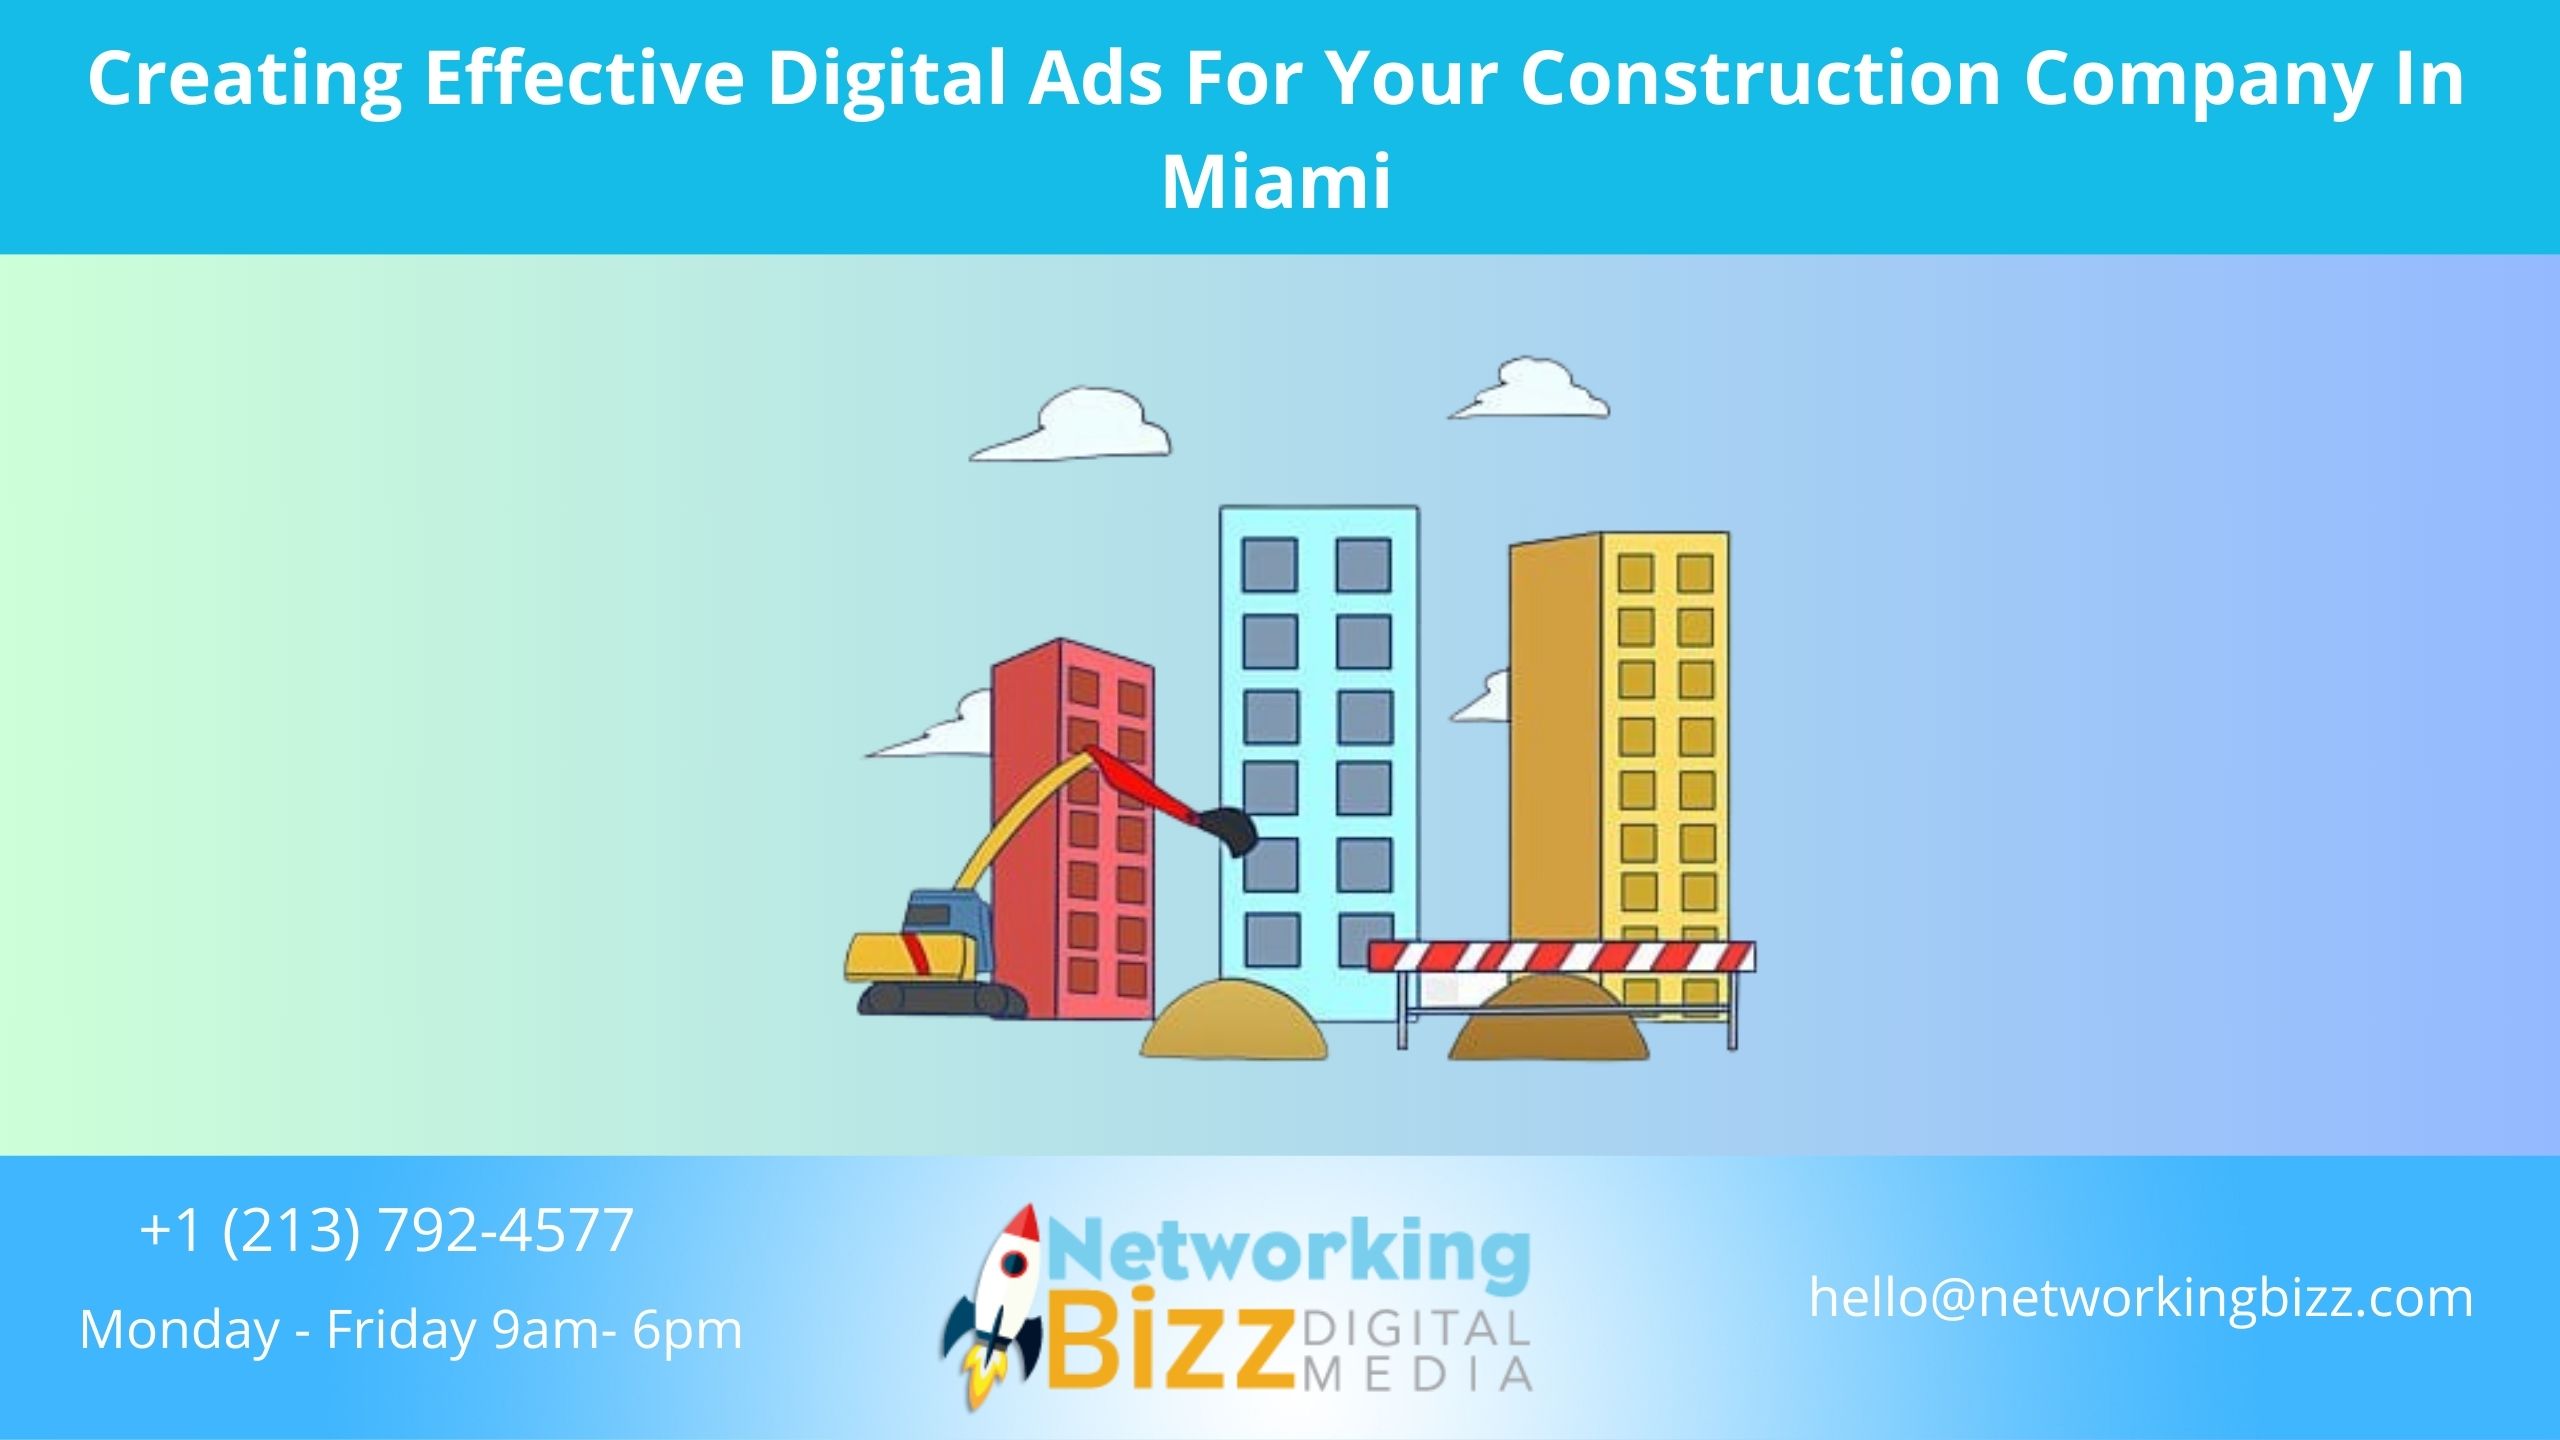 Creating Effective Digital Ads For Your Construction Company In Miami